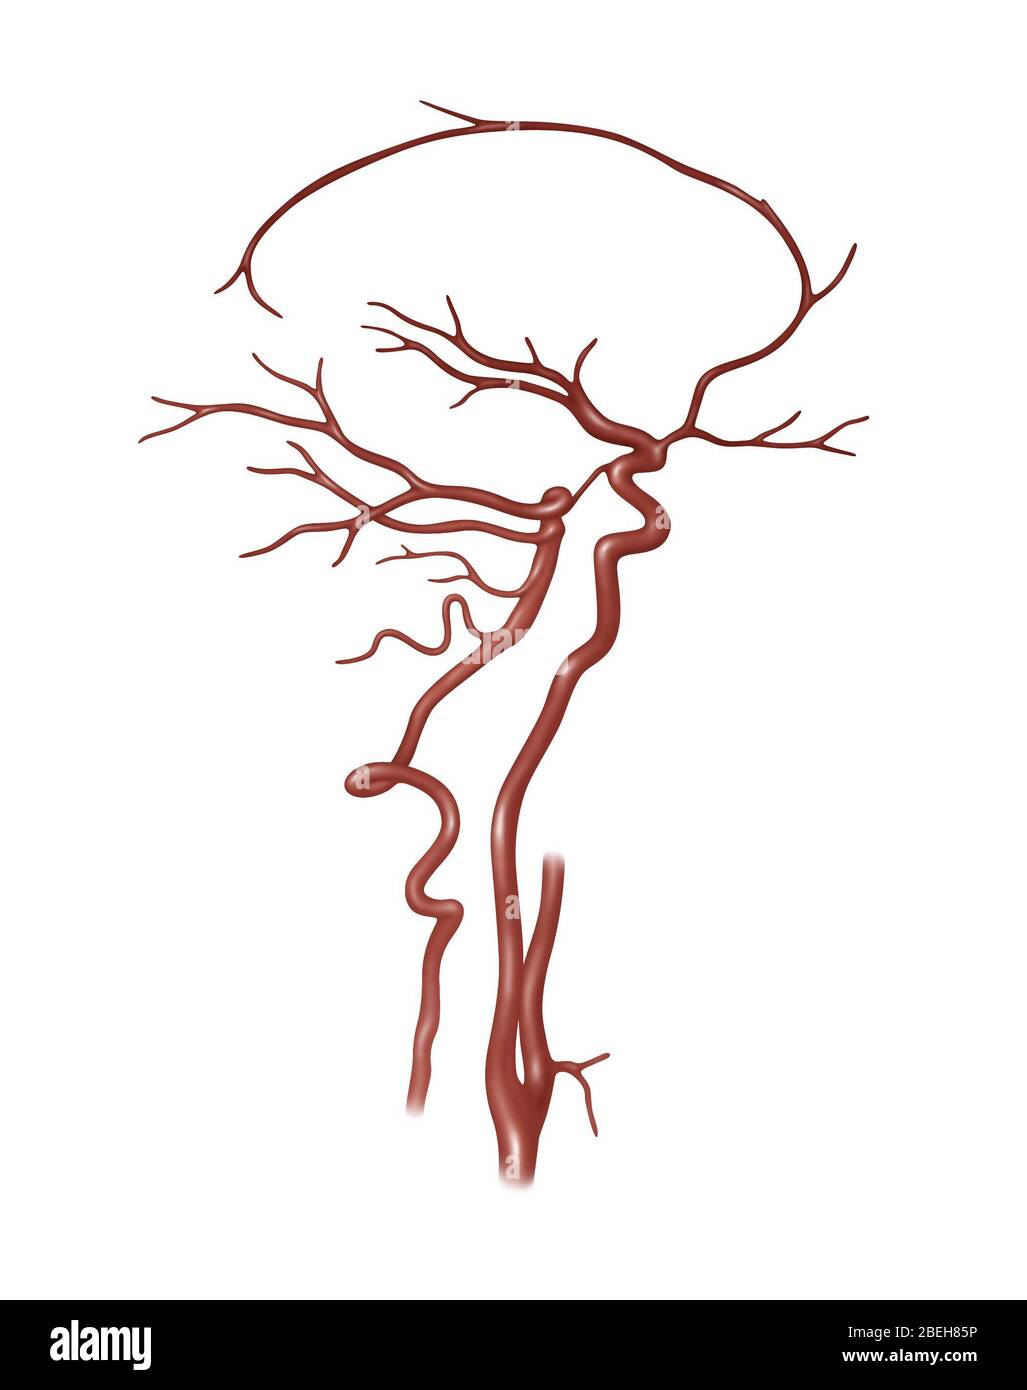 Arteries Found in the Head, Illustration Stock Photo